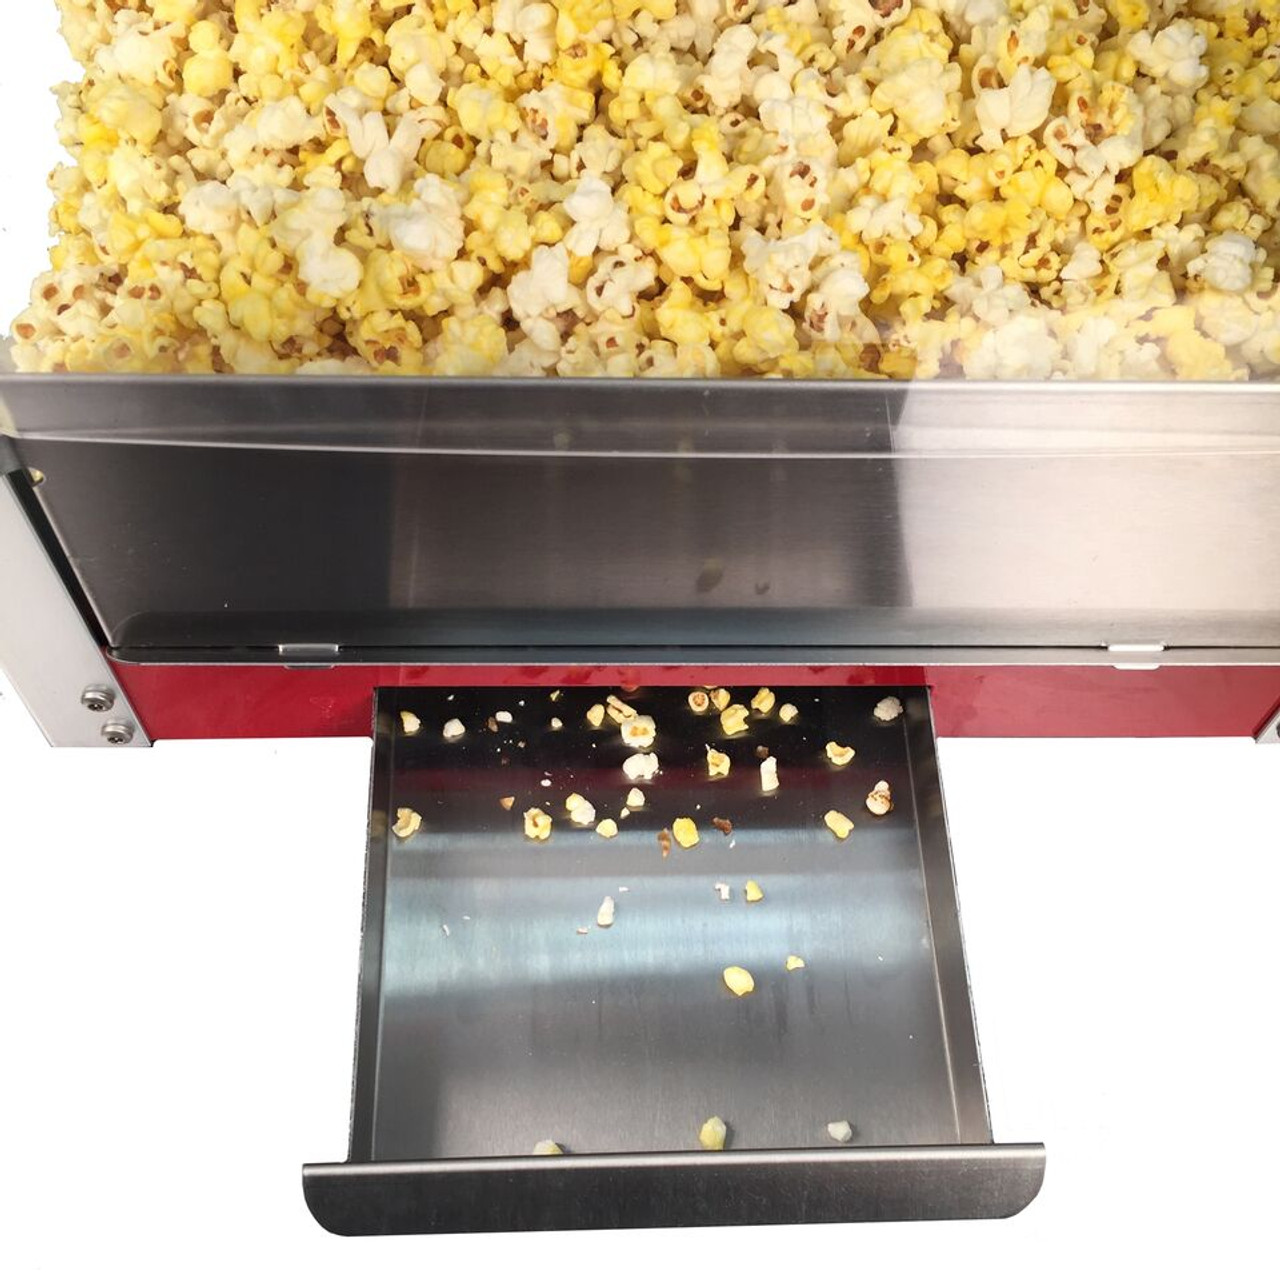 Commercial Popcorn Machines, Electric Popcorn Maker